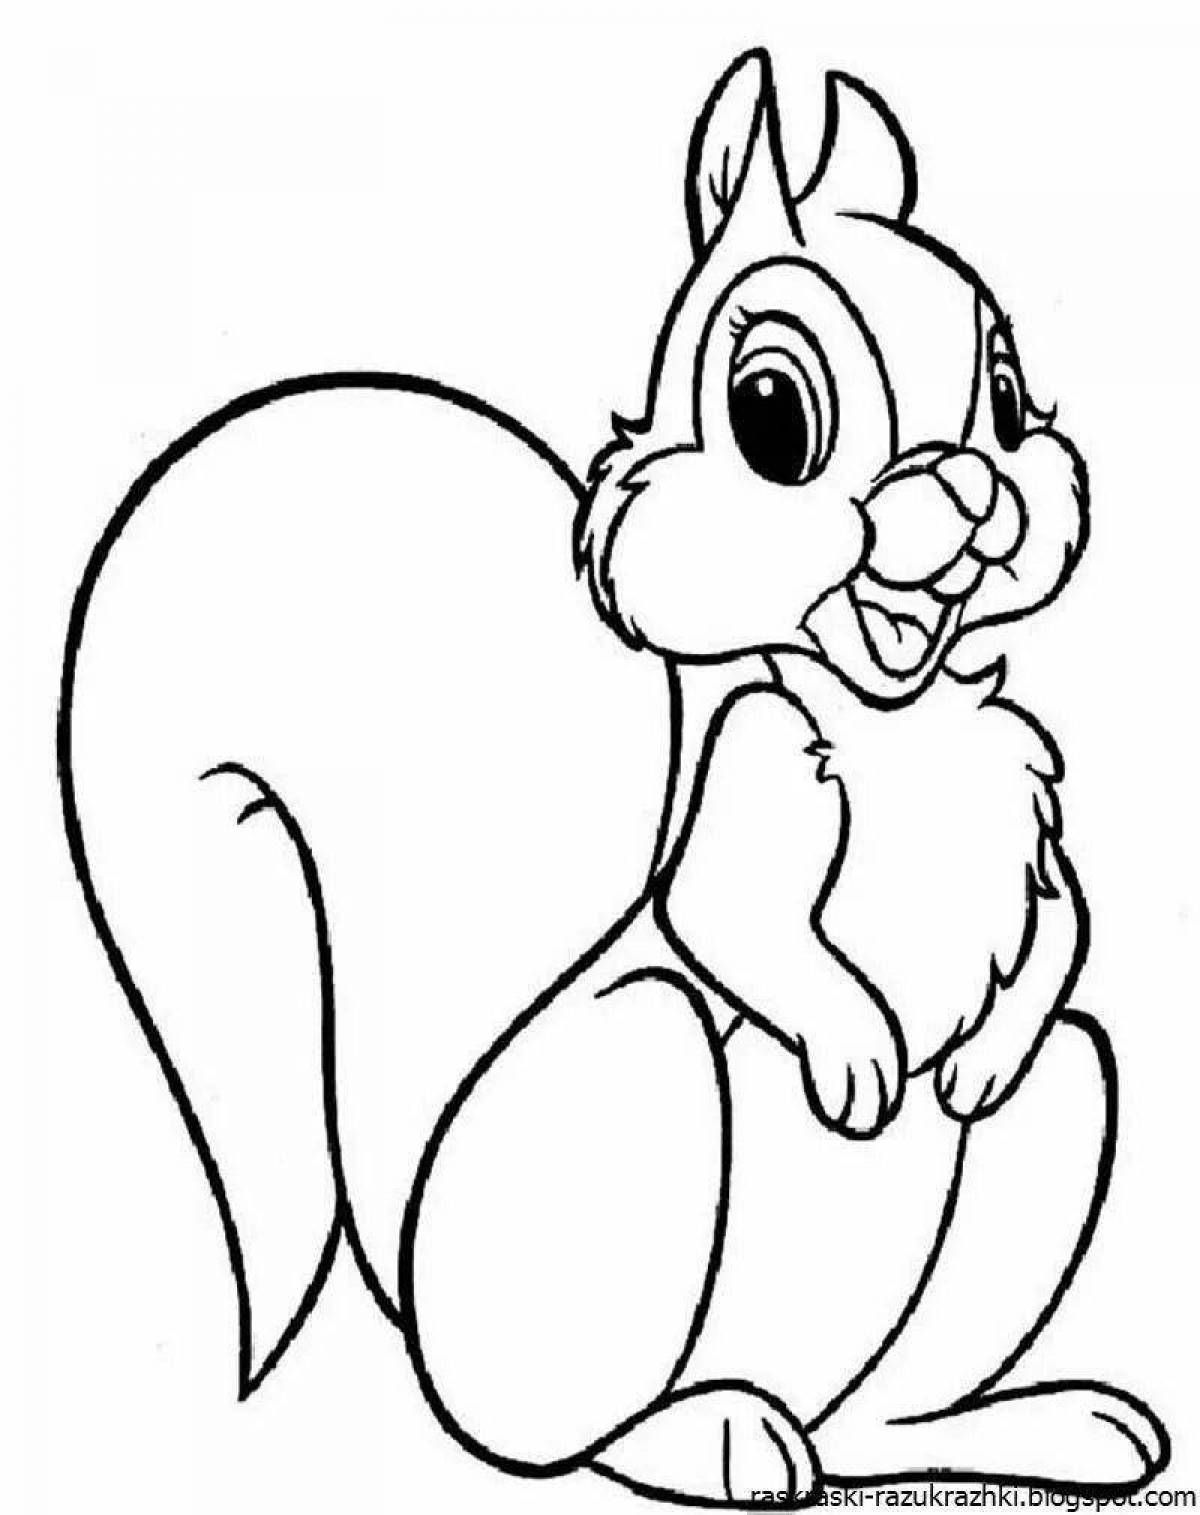 Coloring book gorgeous hare and squirrel